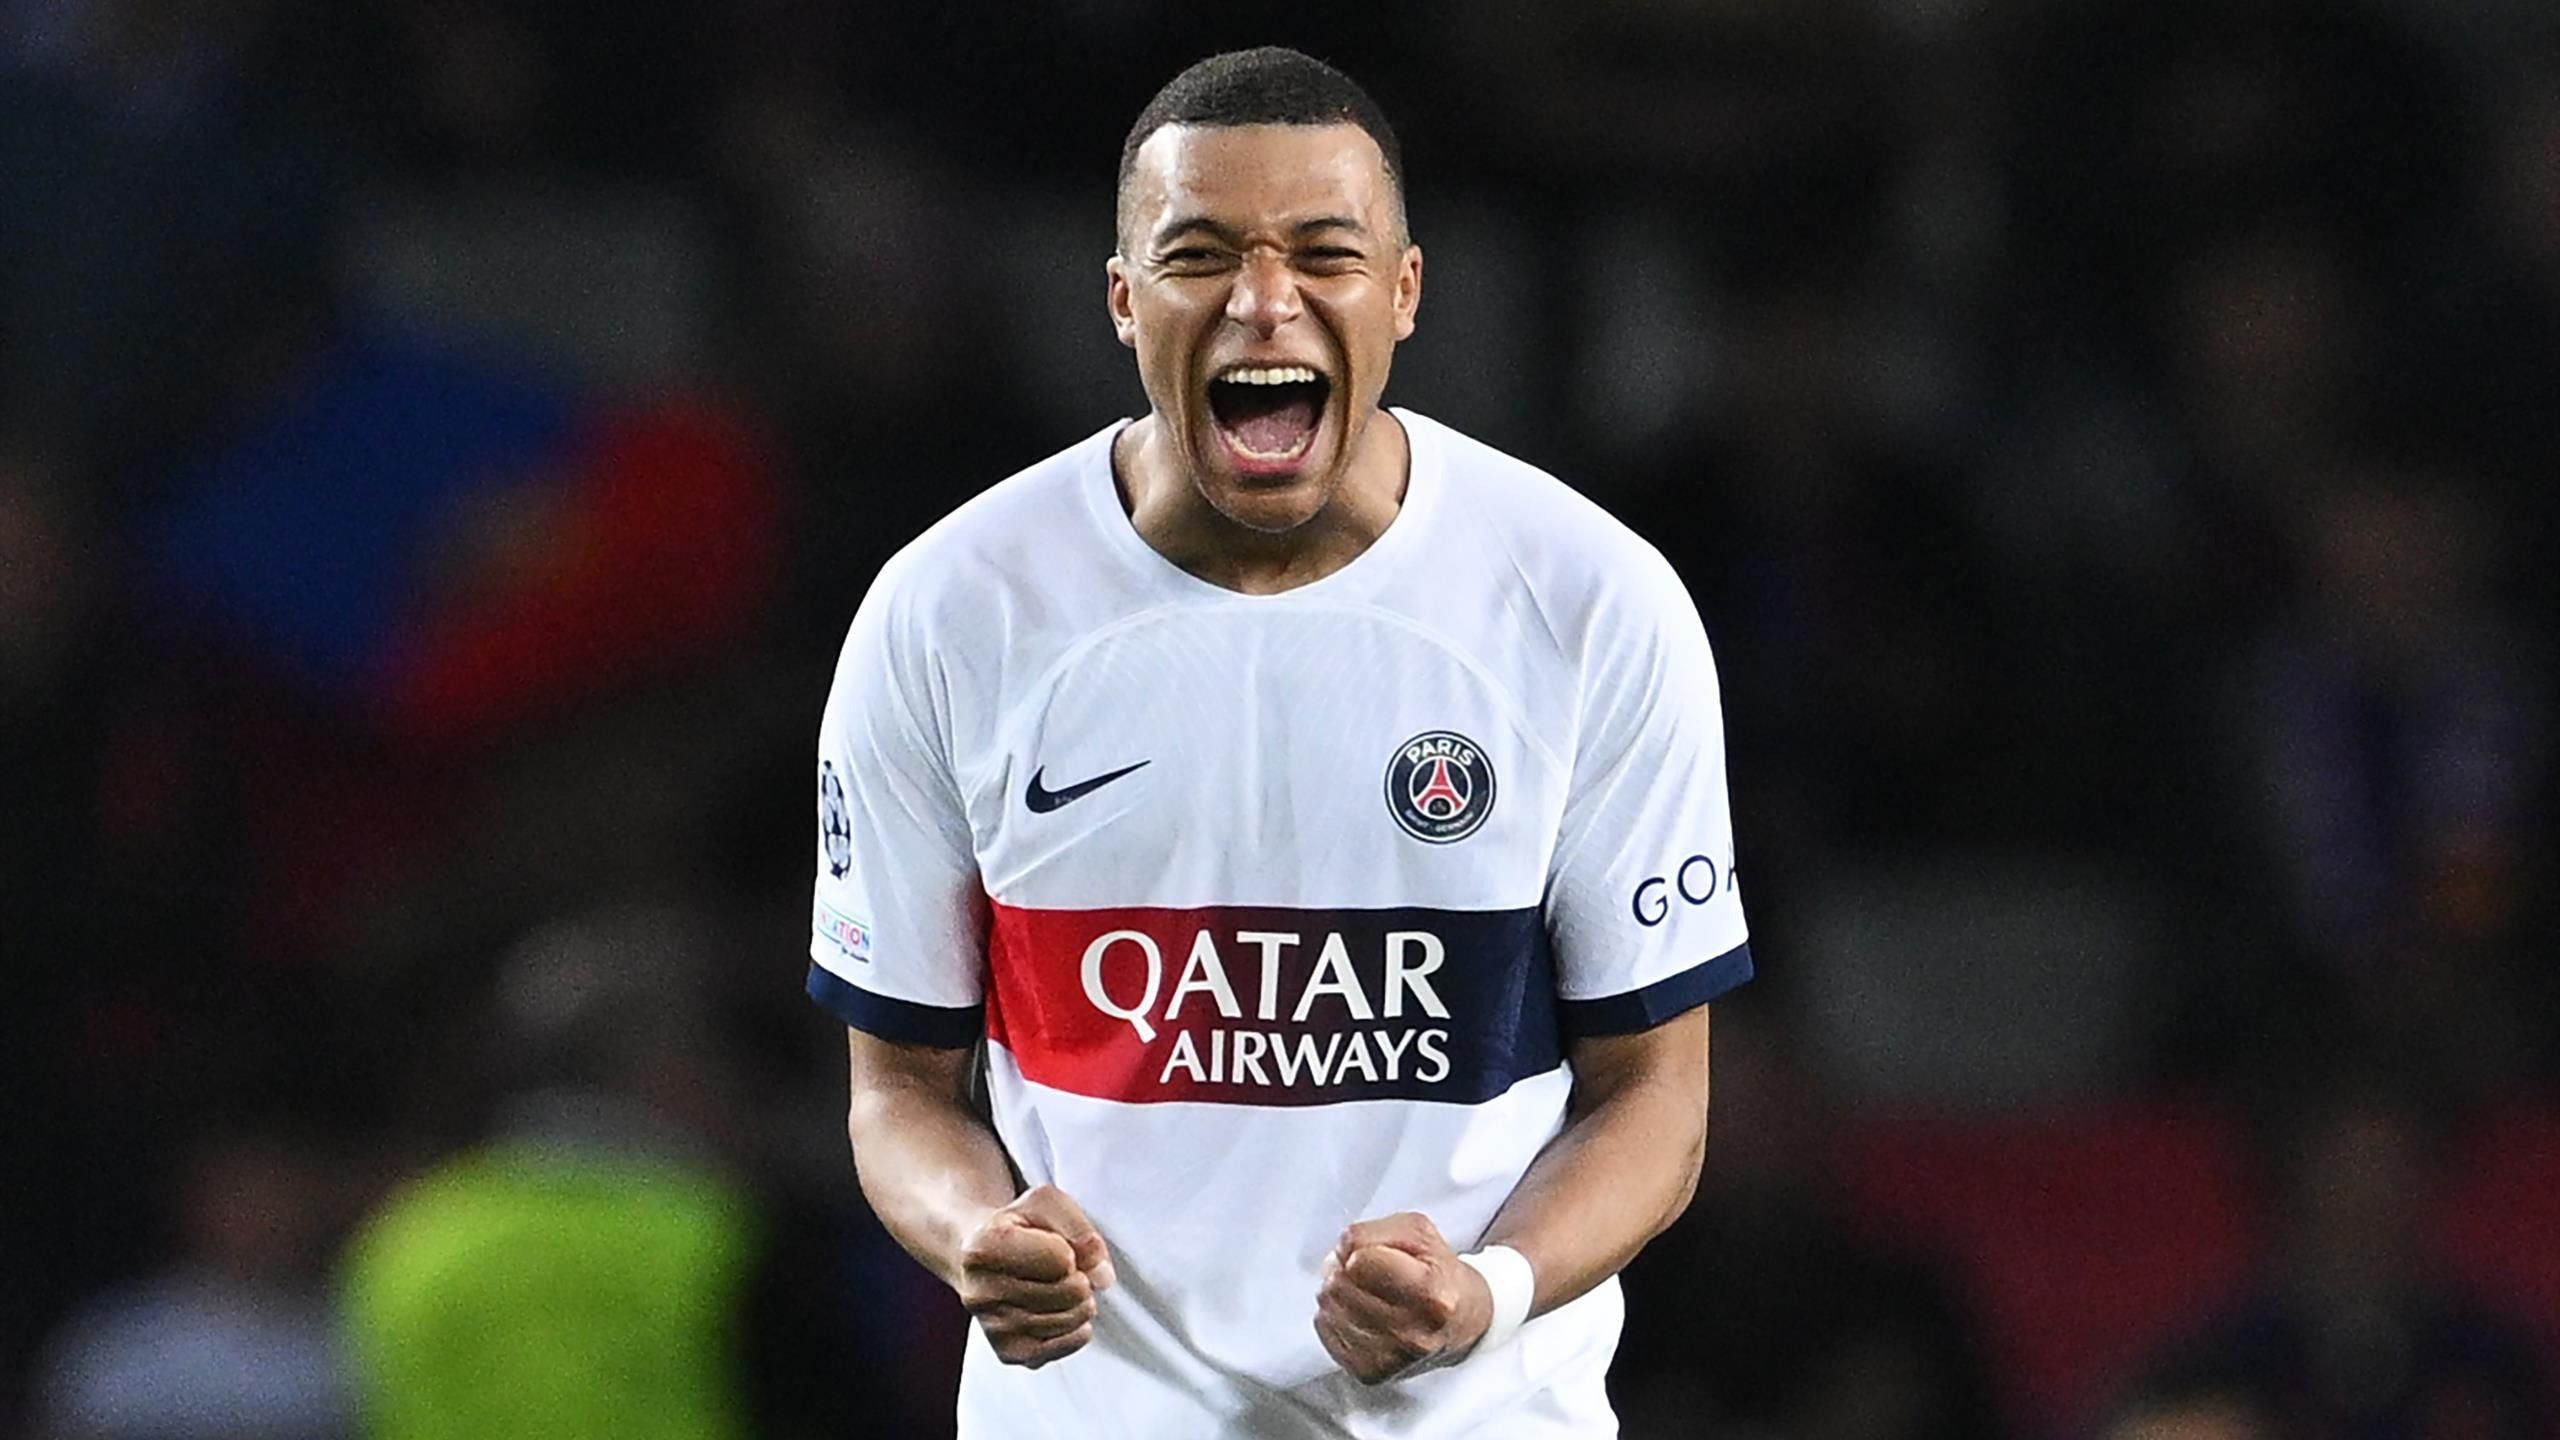 Mbappe To Play For Real Madrid With Number Nine Shirt